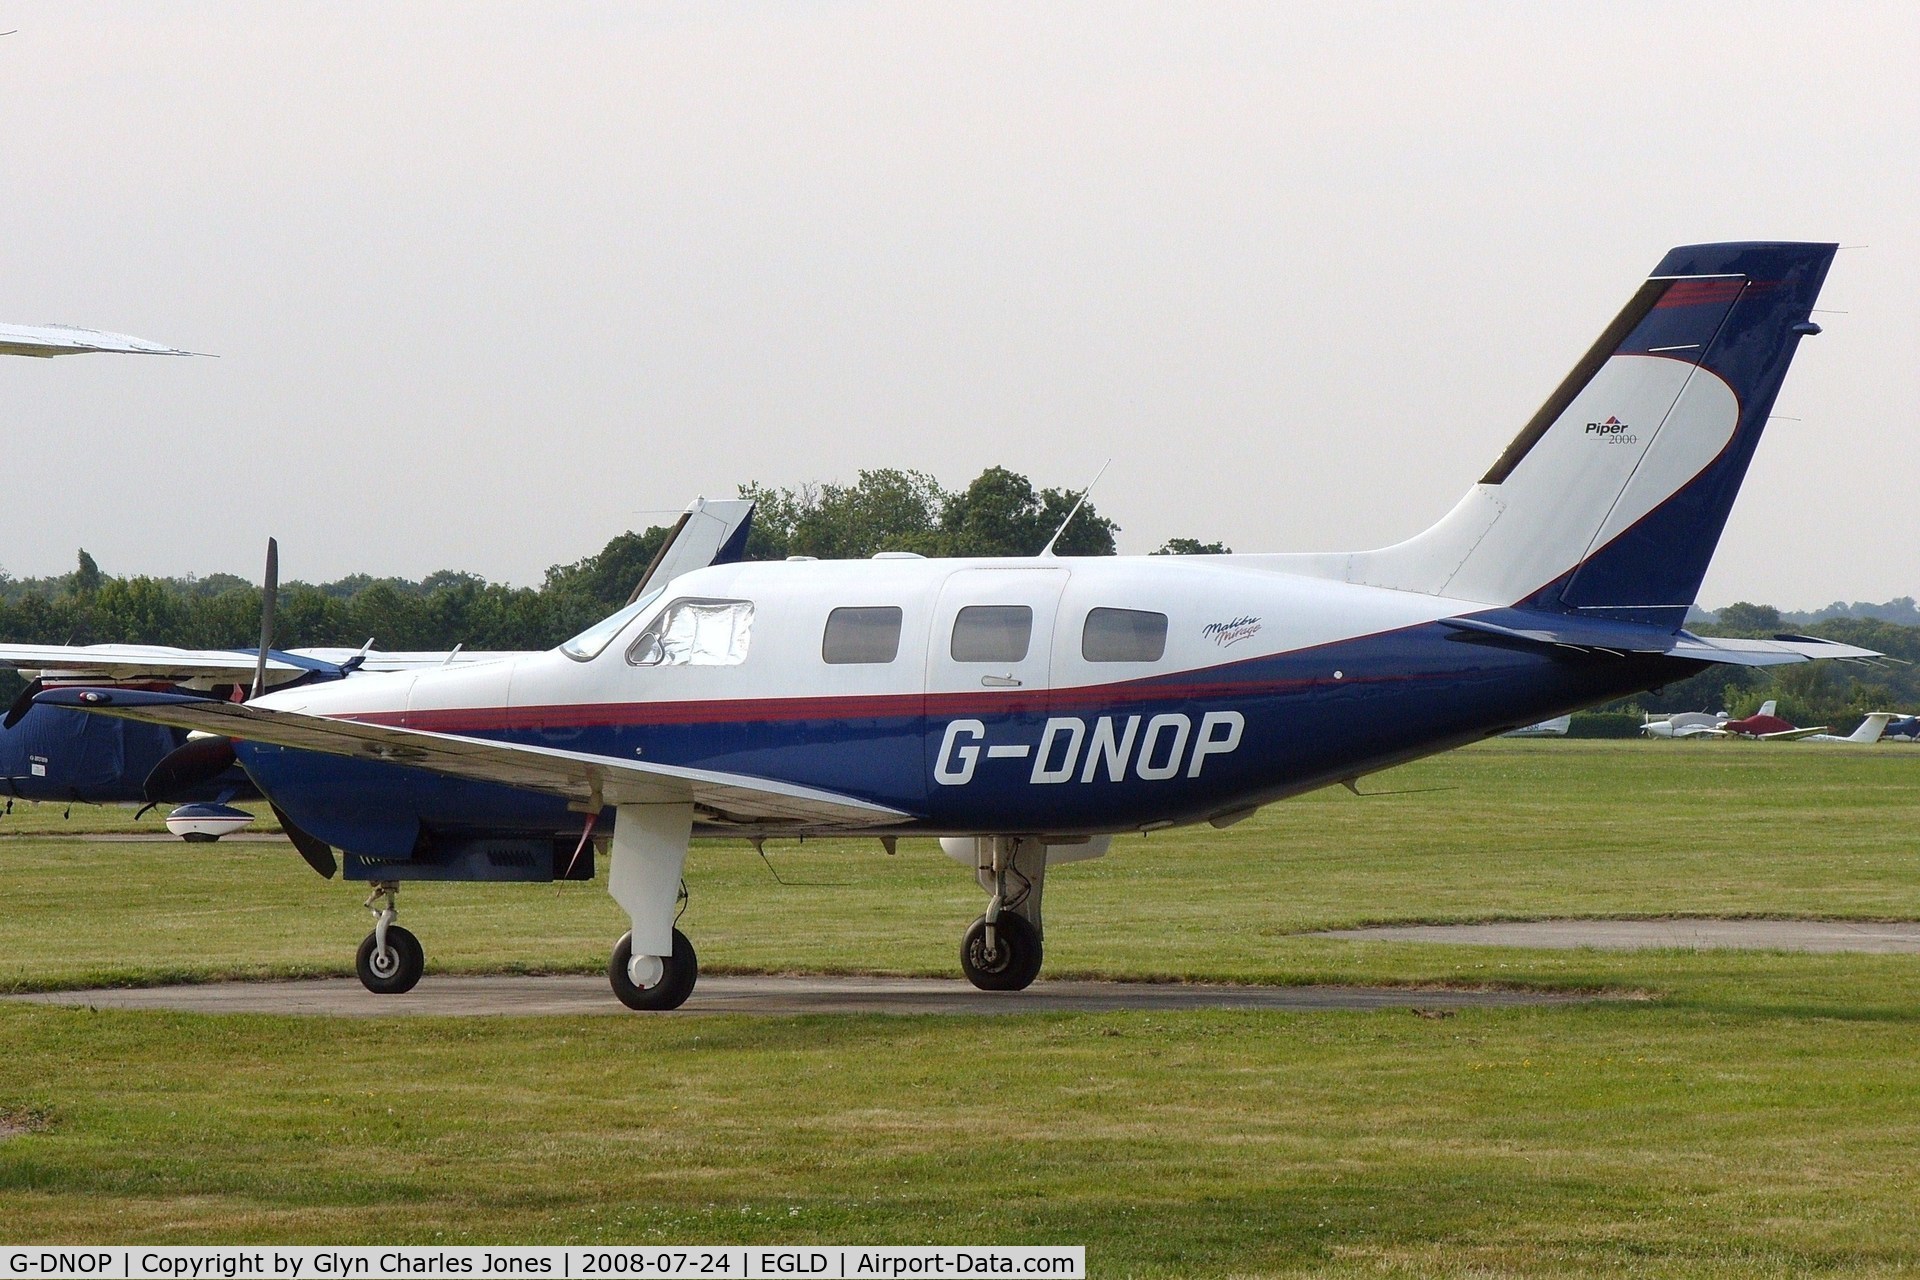 G-DNOP, 2000 Piper PA-46-350P Malibu Mirage C/N 4636303, Owned by Campbell Aviation Ltd.